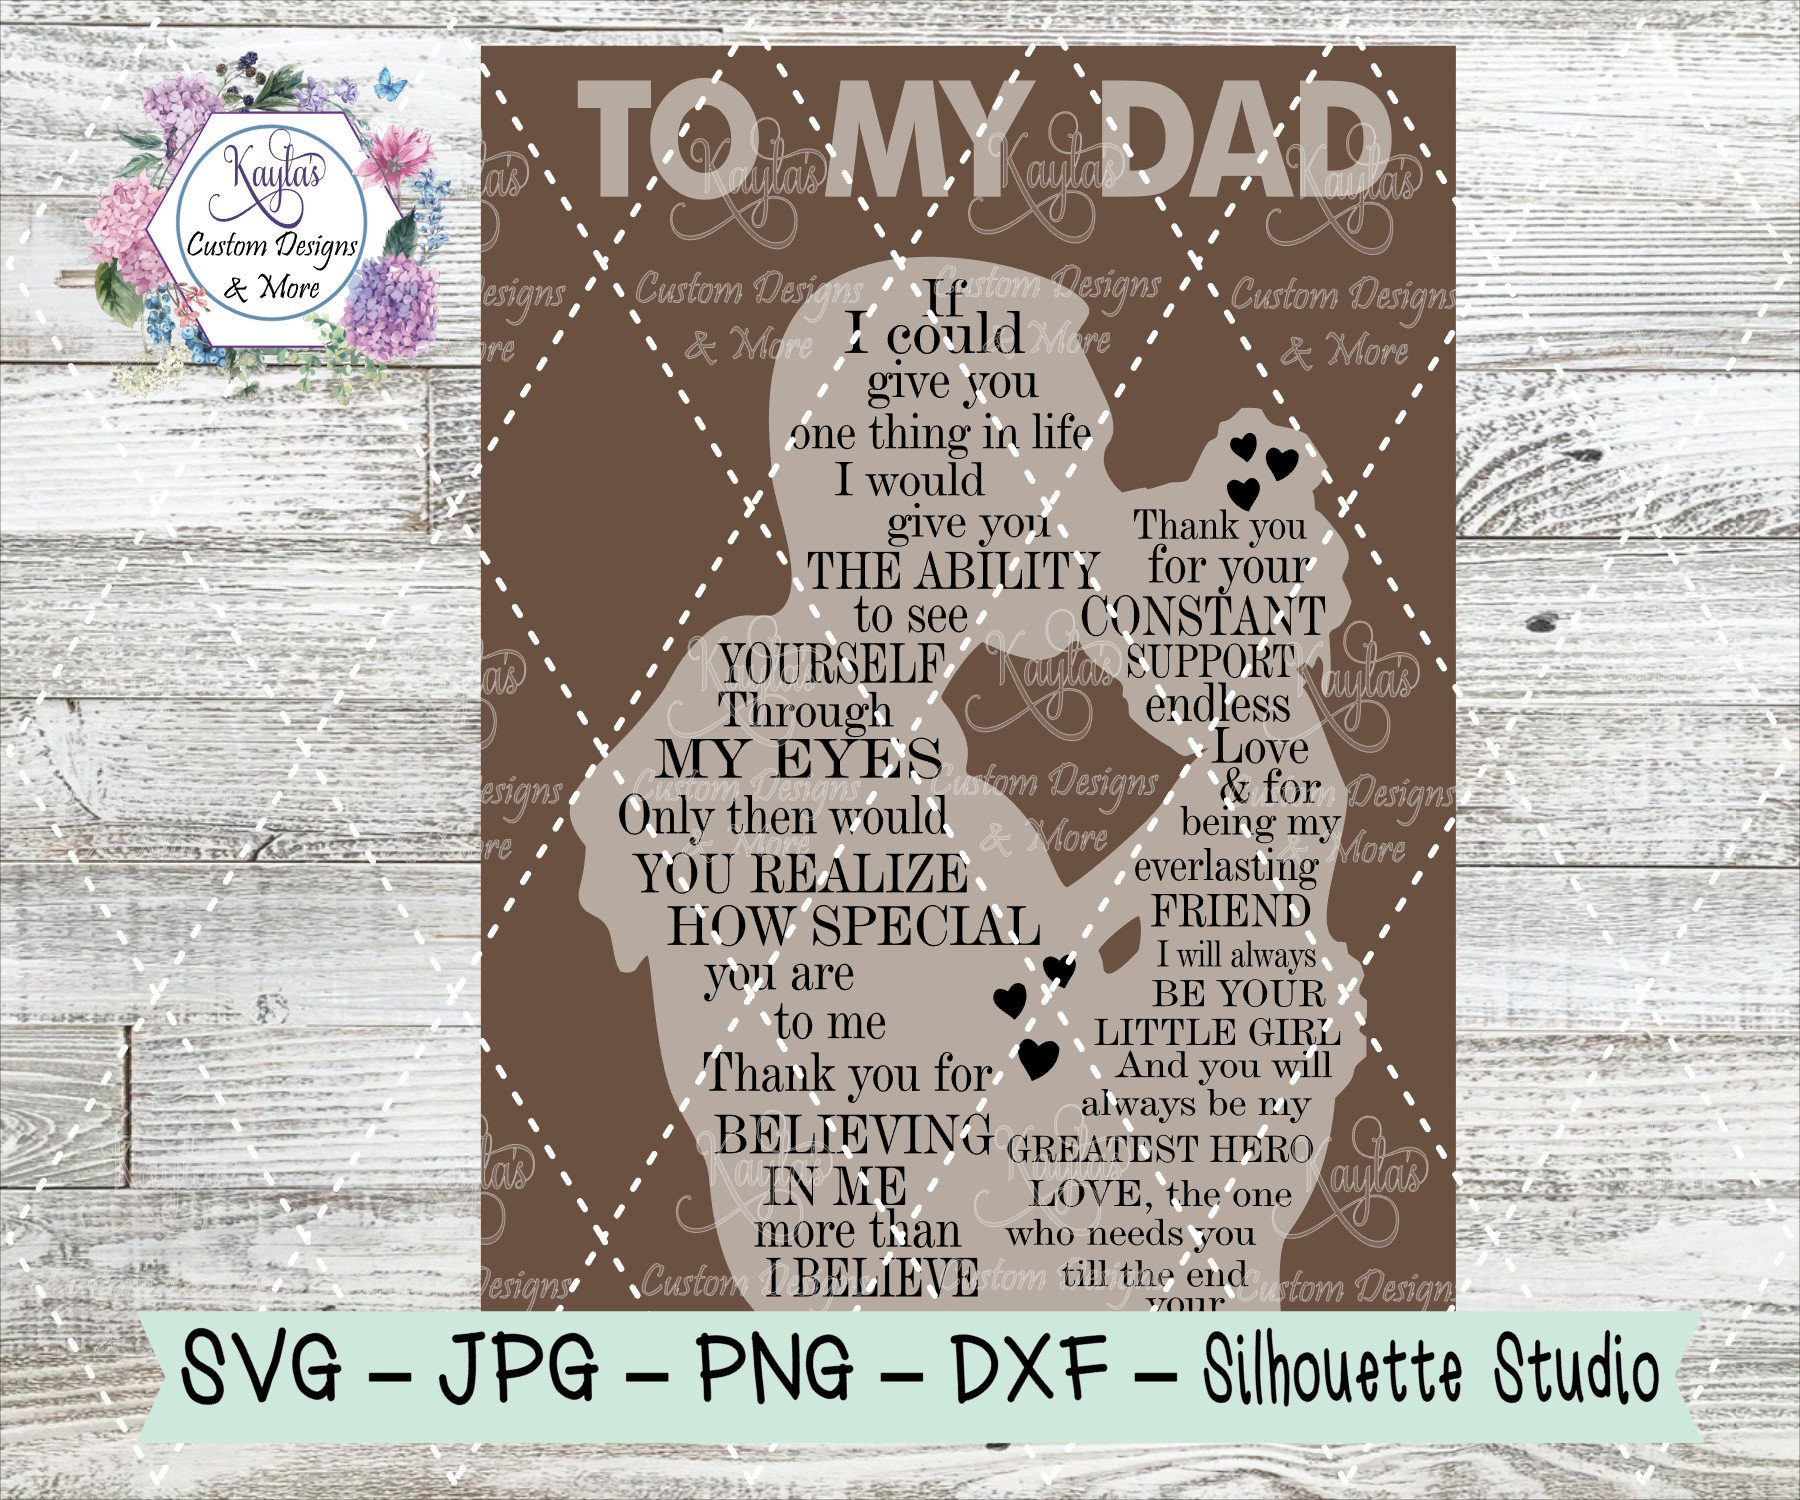 ThisWear Adoptive Dad Gifts for Men Remember Bon-s Dad I Love You